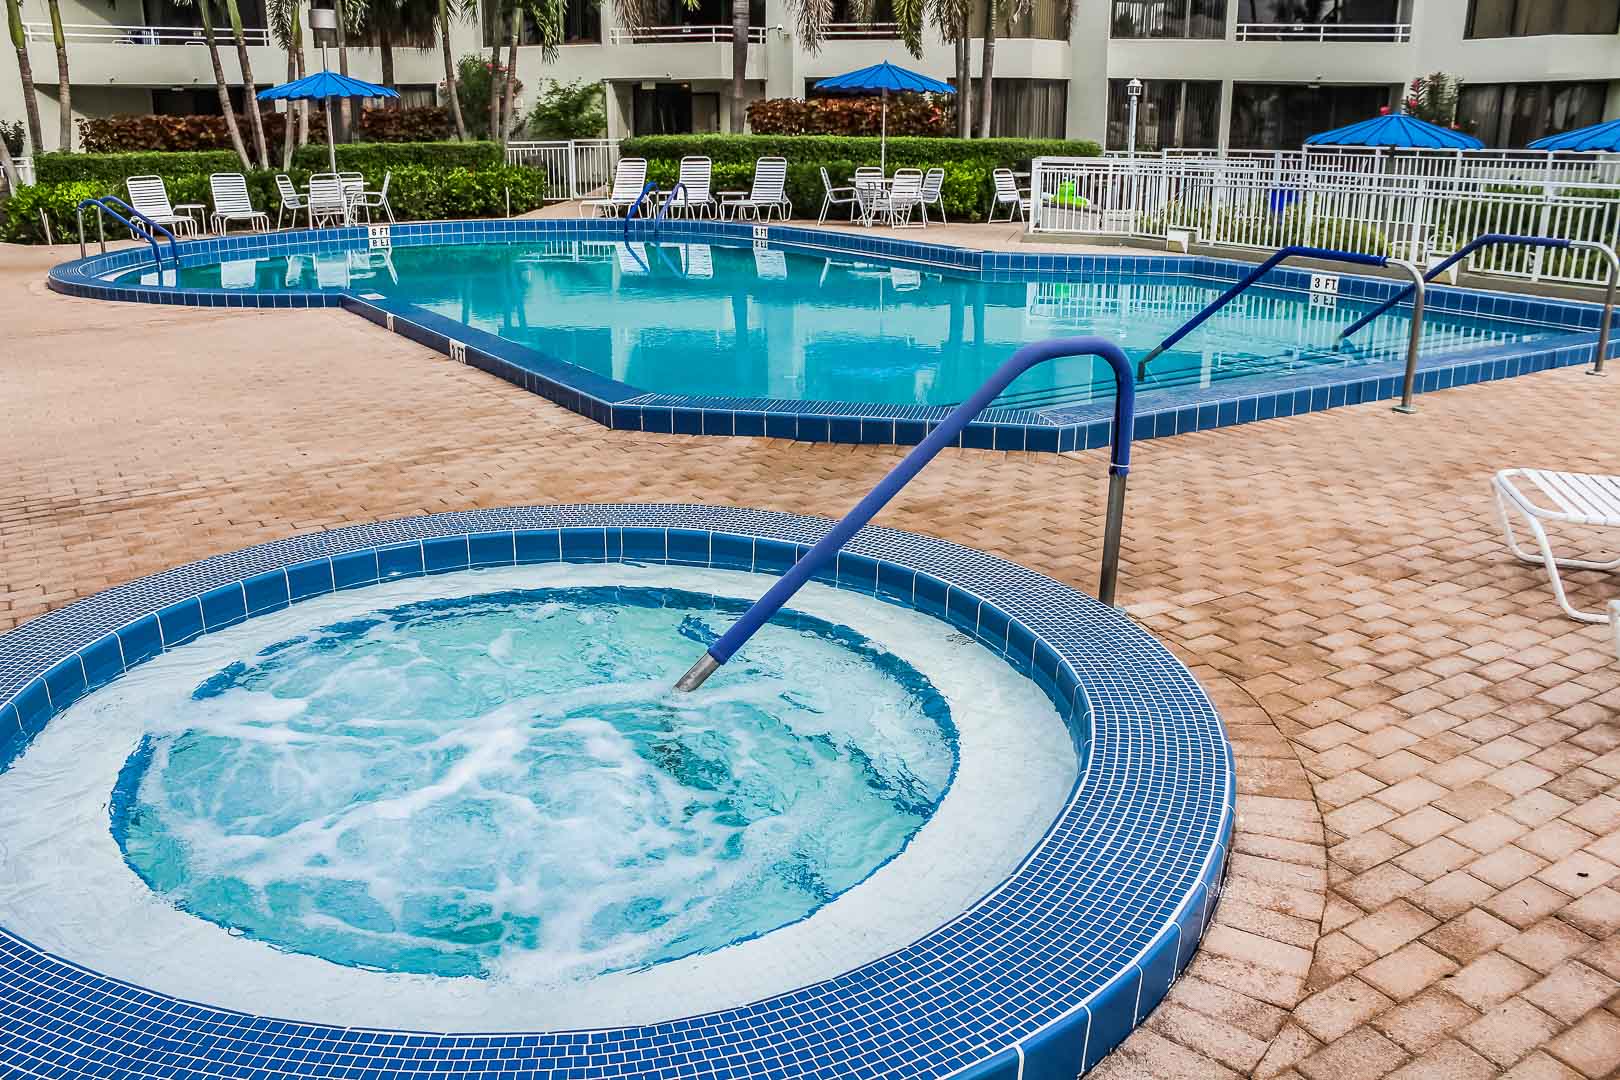 A refreshing Pool and Jacuzzi at VRI's Berkshire by the Sea in Florida.